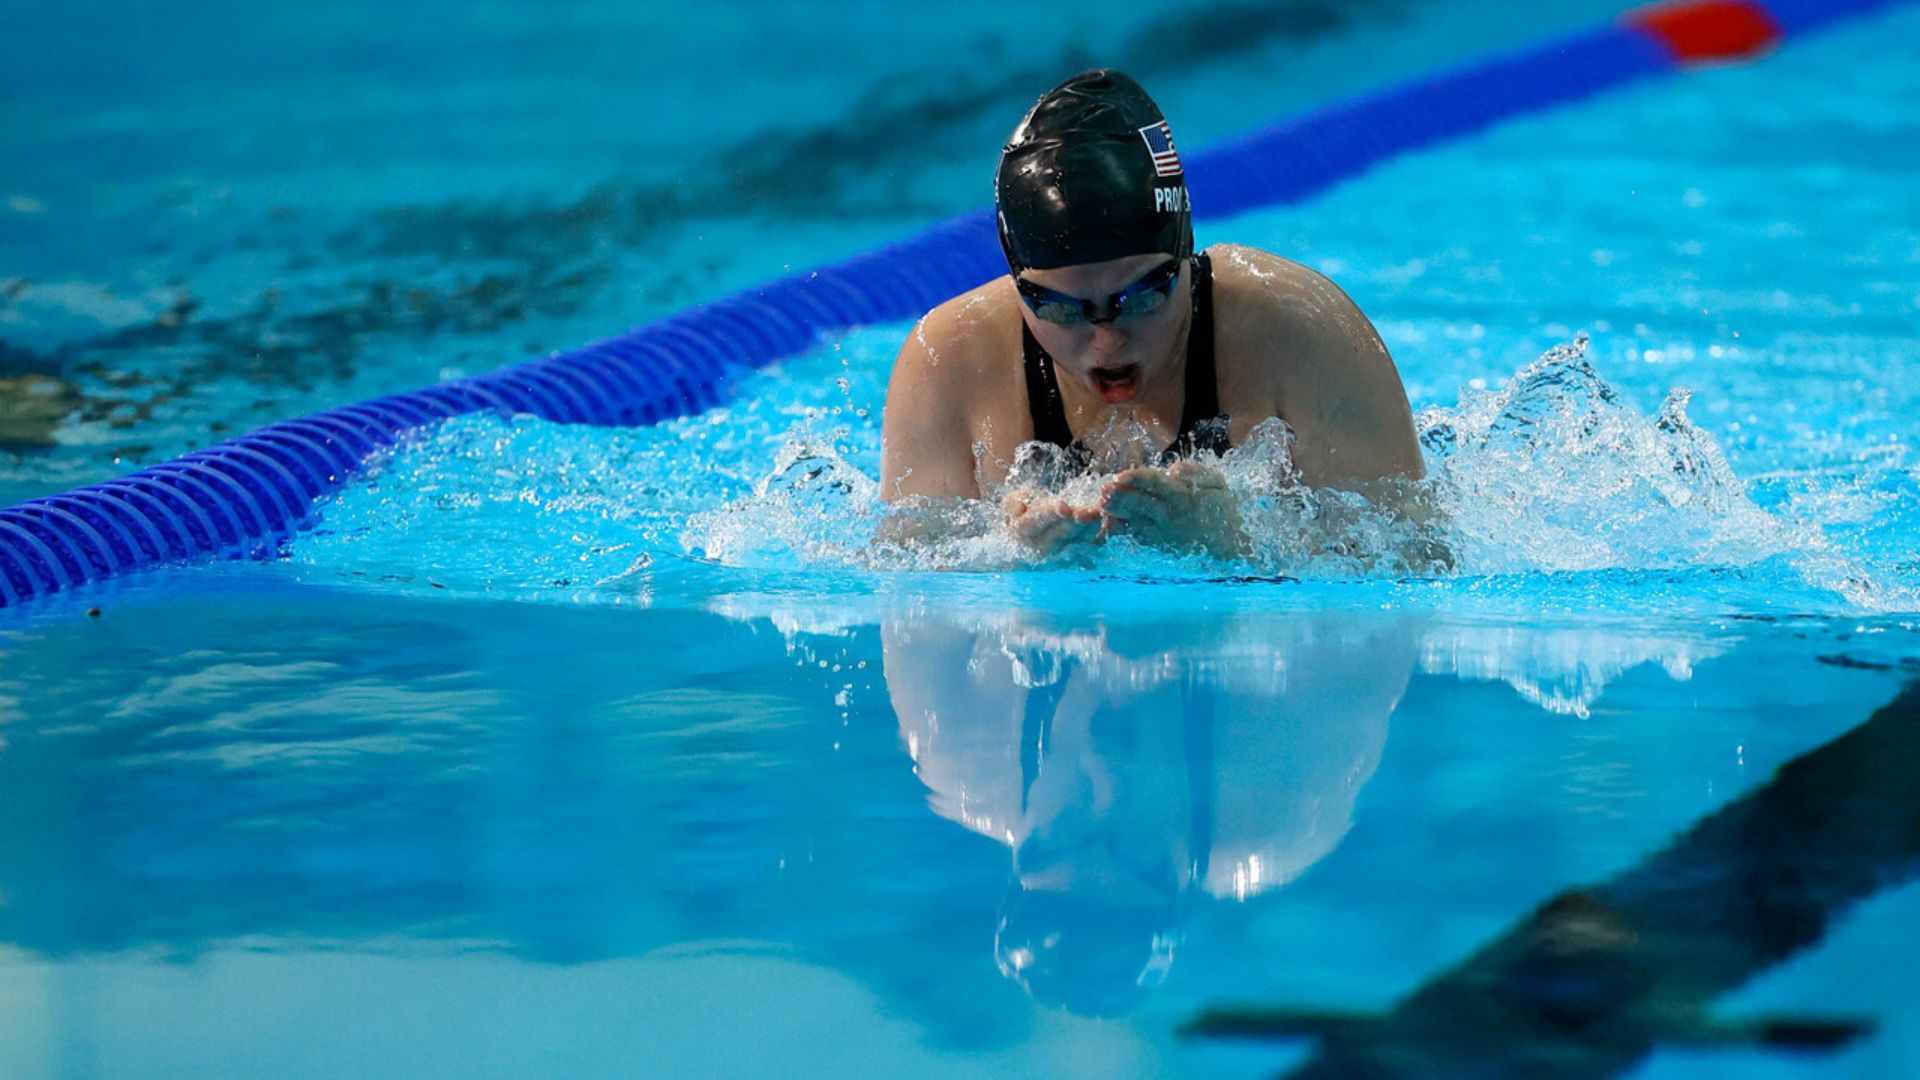 Francisca Neiman Won the Bronze Medal in the 100-meter Breaststroke